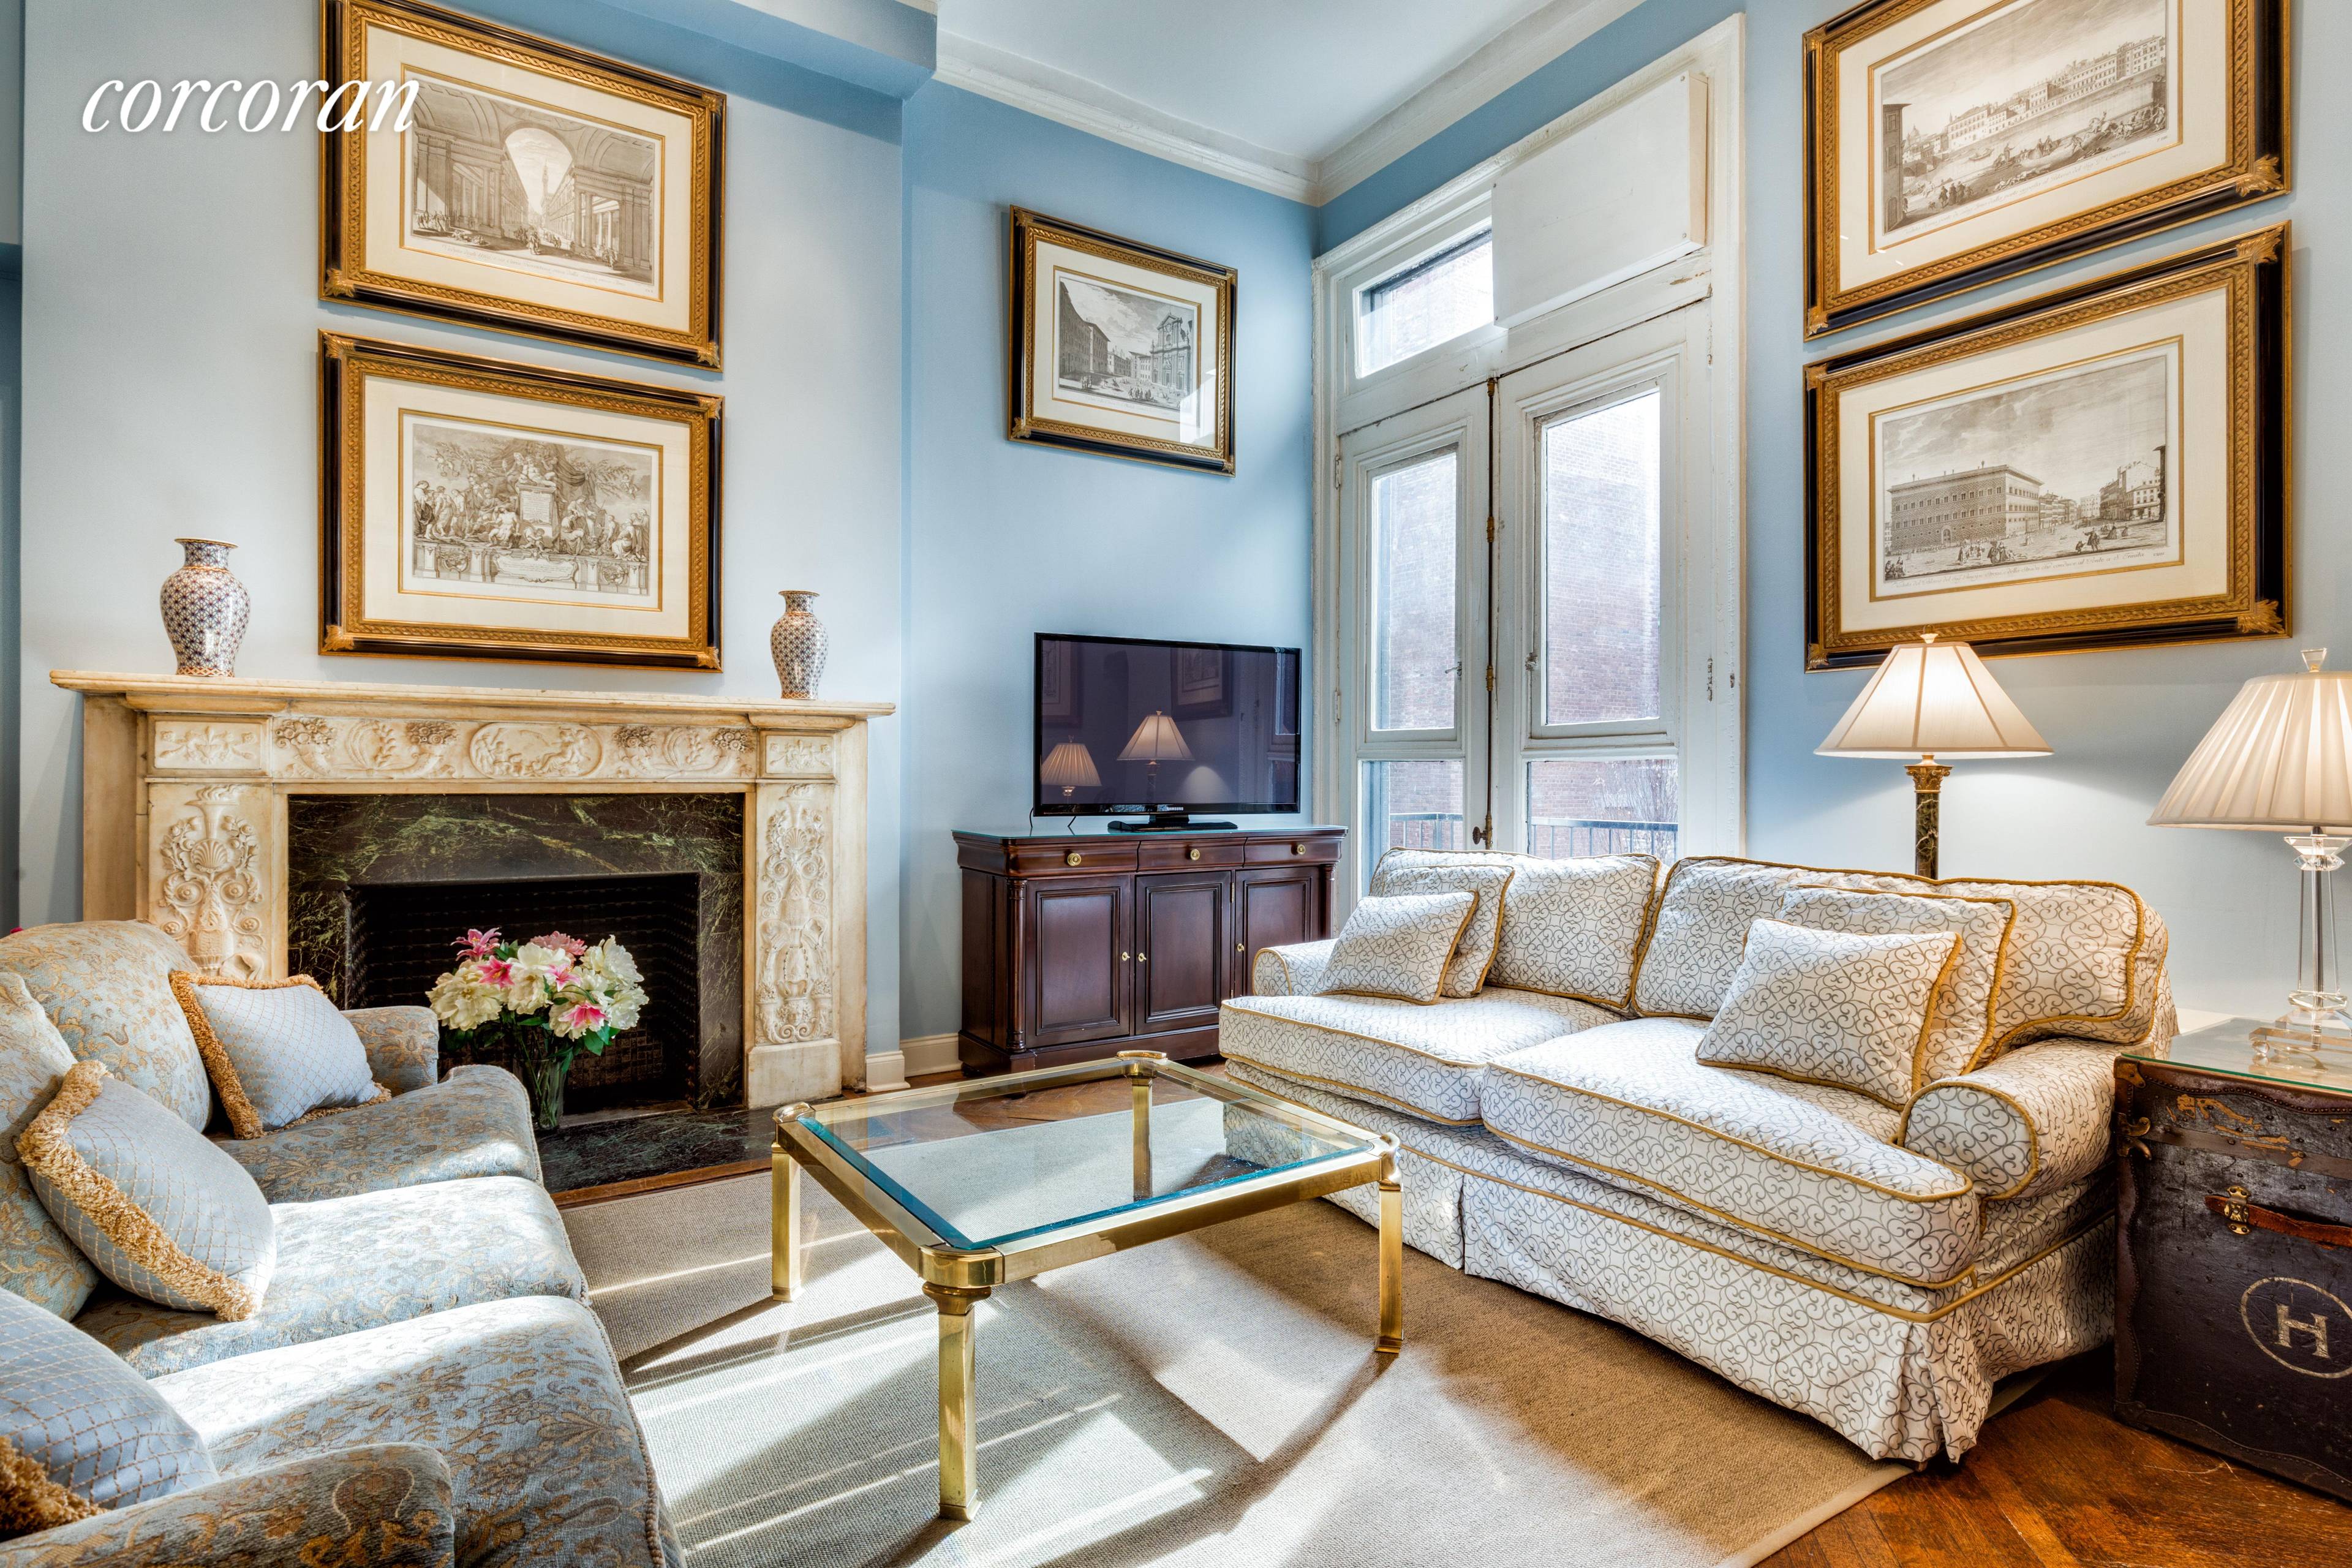 Working from home ? Extremely rare opportunity to live work in a grand limestone mansion with elevator off Central Park located in prime Upper East Side.